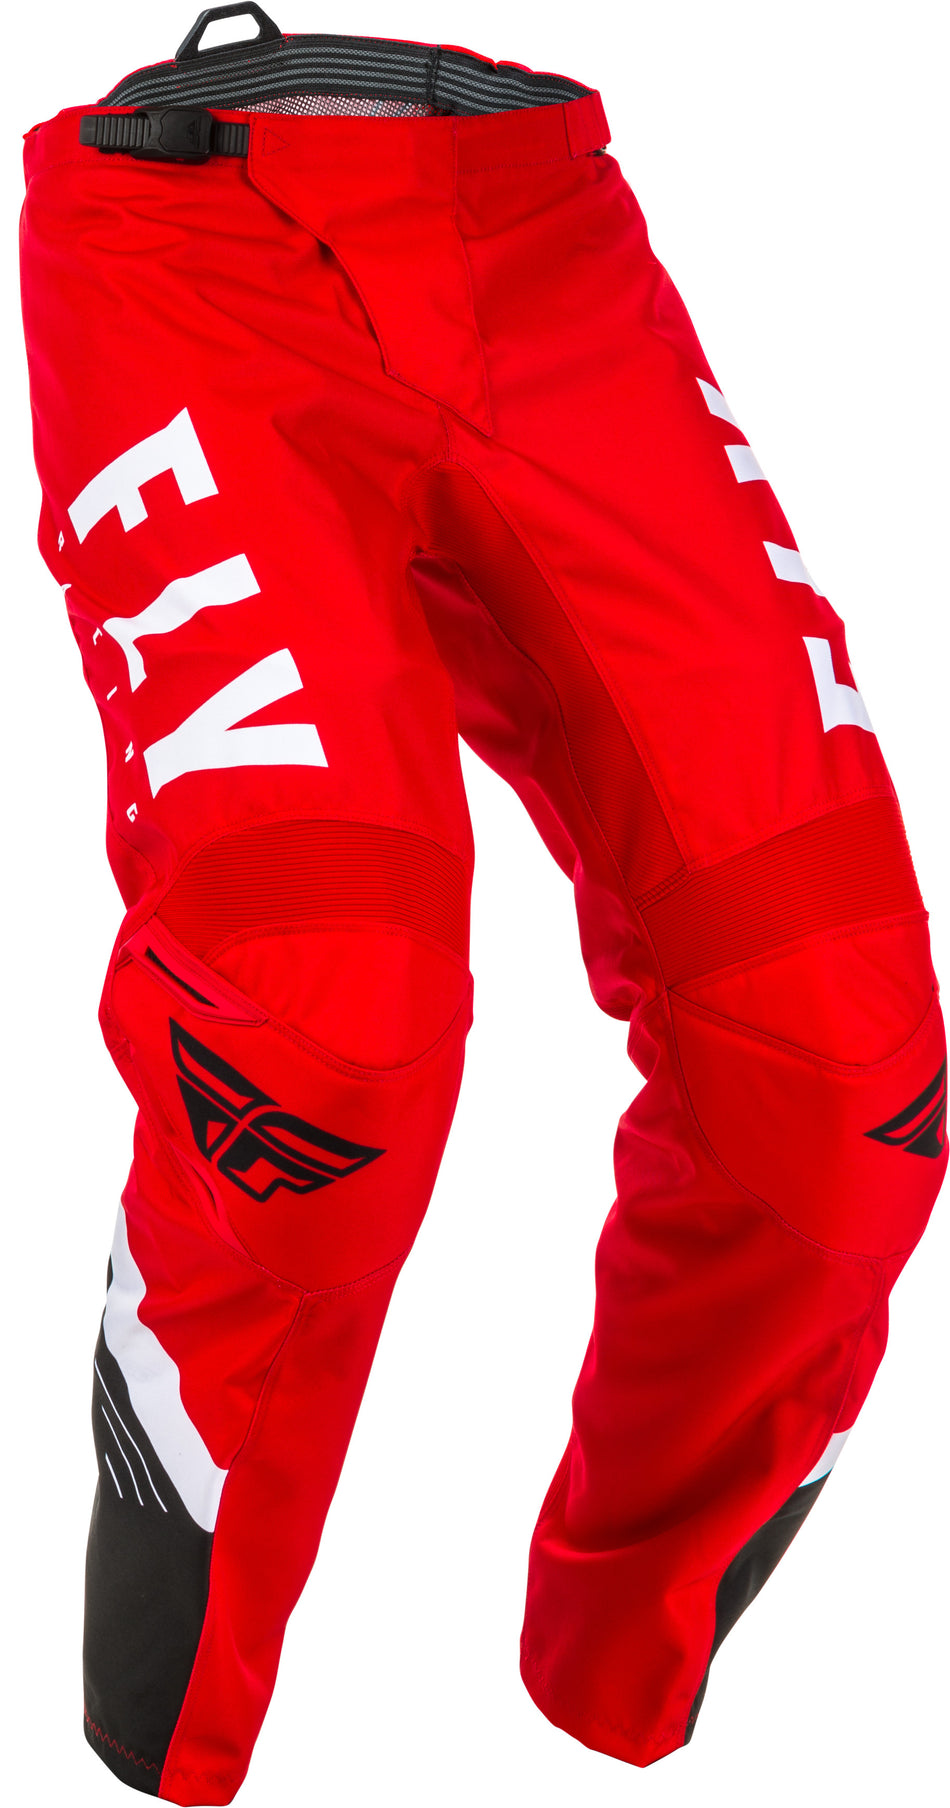 FLY RACING F-16 Pants Red/Black/White Sz 30 373-93330